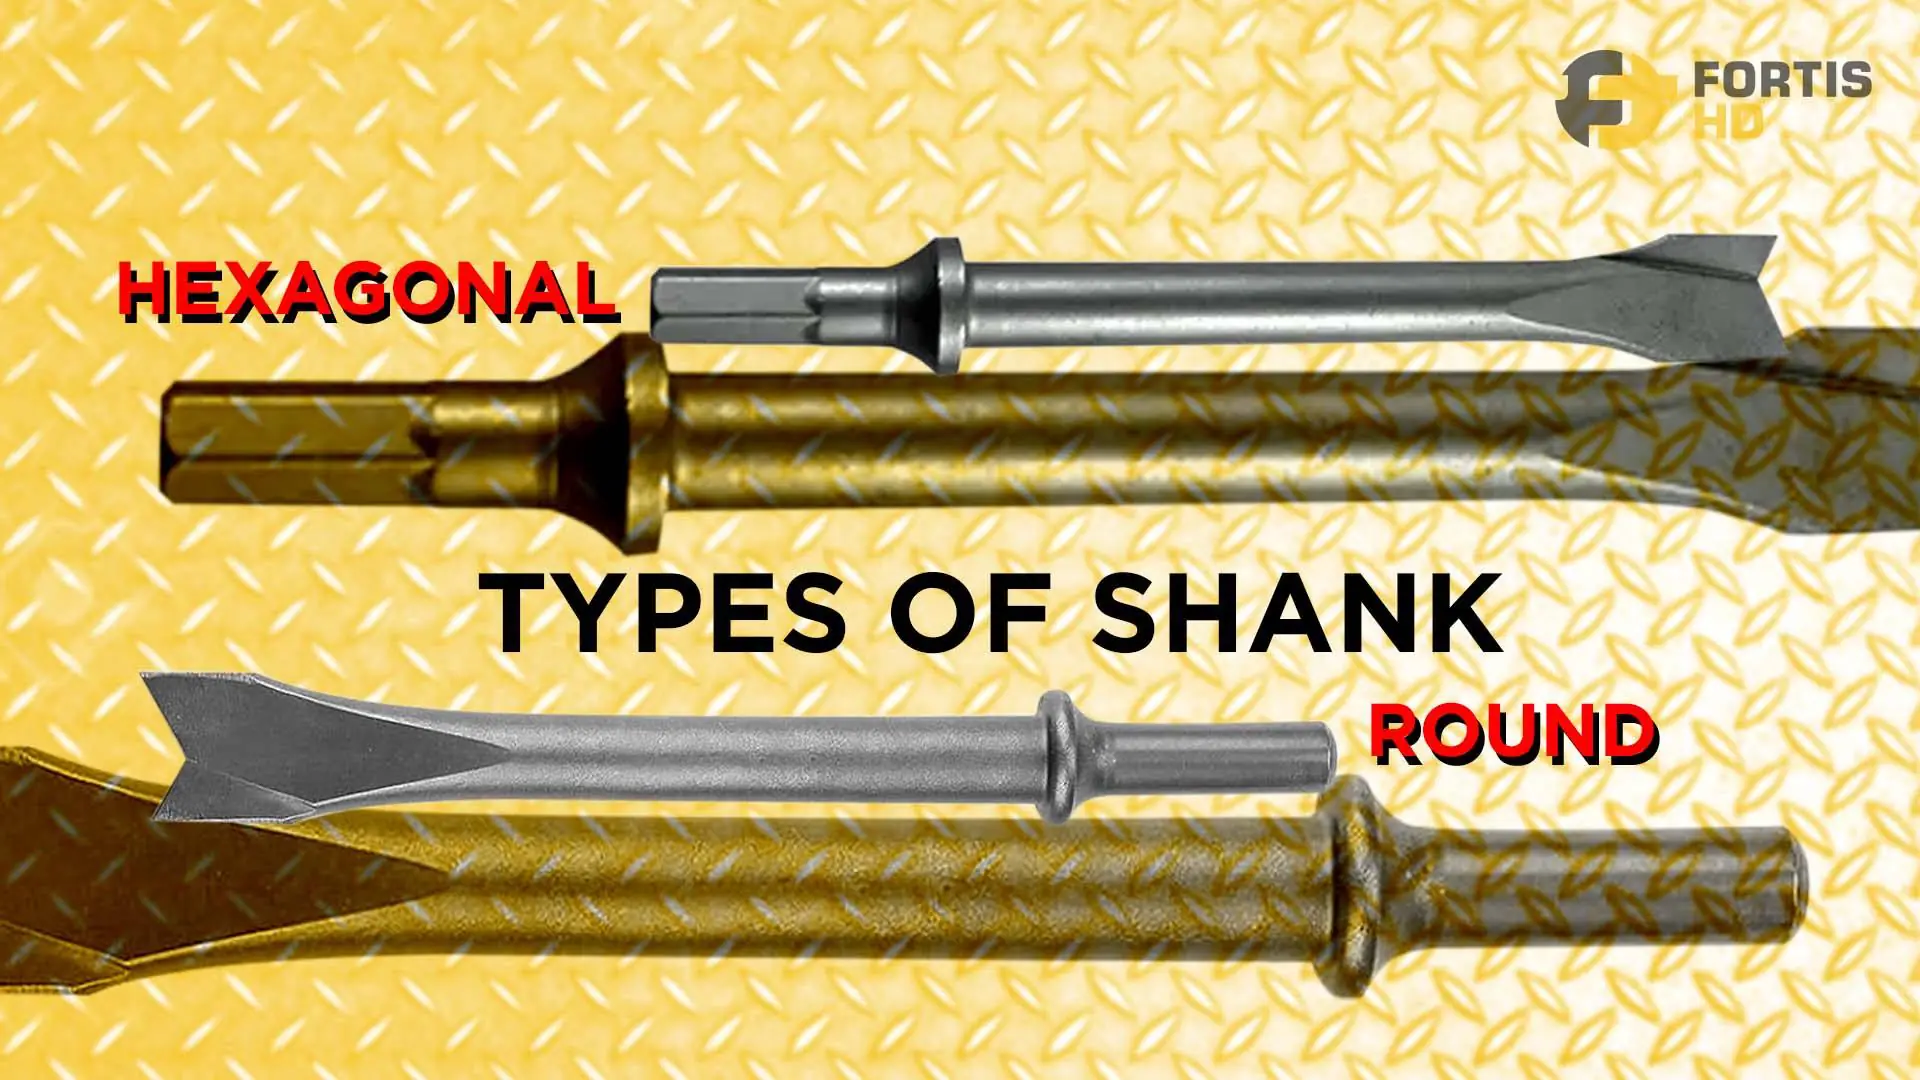 Comparison between two types of shanks of chisel bits: round and hex.